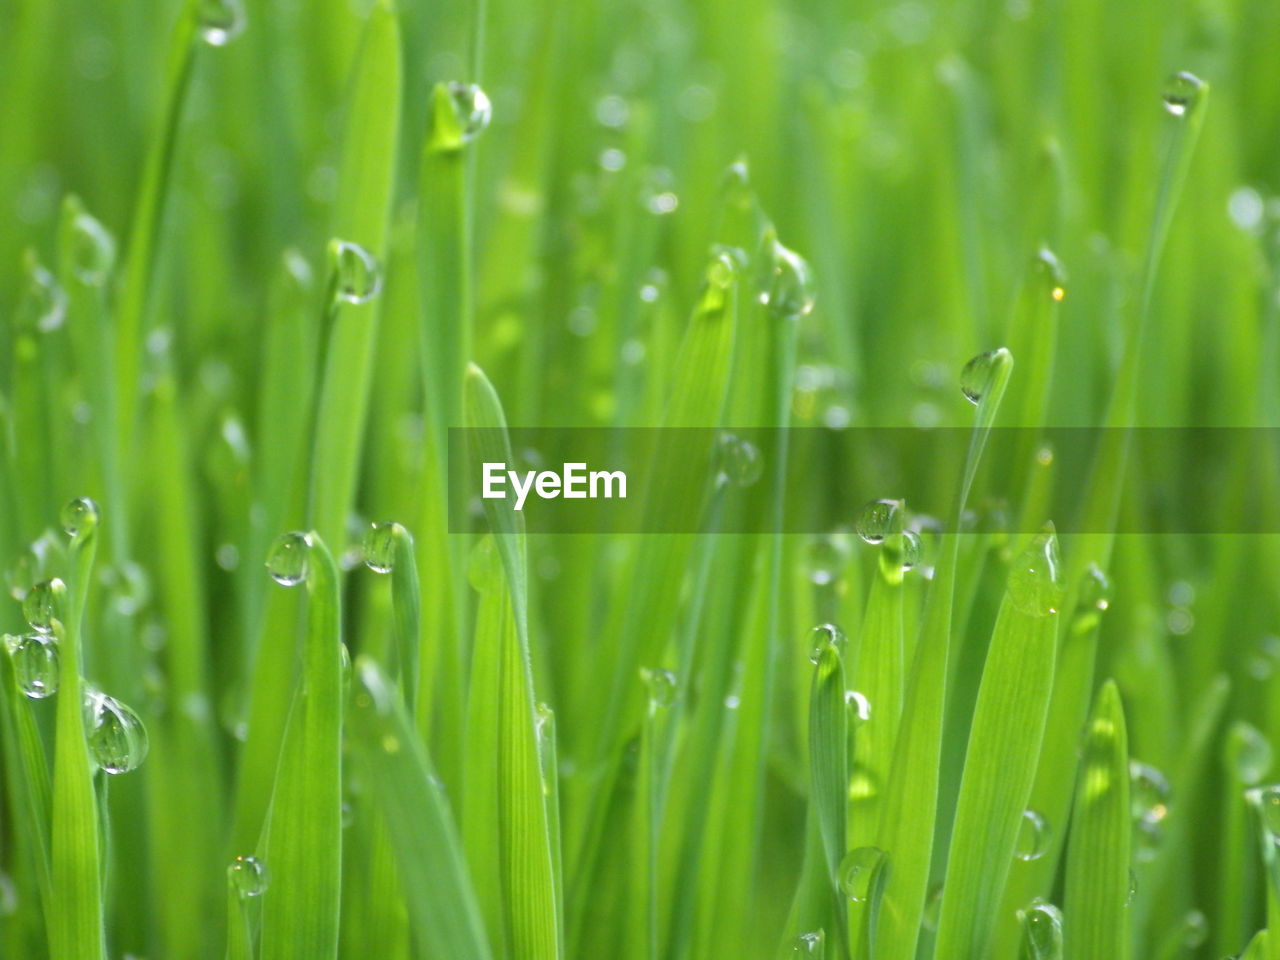 plant, green, moisture, grassland, nature, water, dew, drop, wet, beauty in nature, grass, growth, backgrounds, lawn, freshness, environment, blade of grass, no people, field, close-up, meadow, plant stem, land, wheatgrass, full frame, rain, macro photography, selective focus, outdoors, summer, leaf, springtime, environmental conservation, foliage, day, lush foliage, landscape, tranquility, vibrant color, plant part, plain, hierochloe, agriculture, flower, macro, fragility, focus on foreground